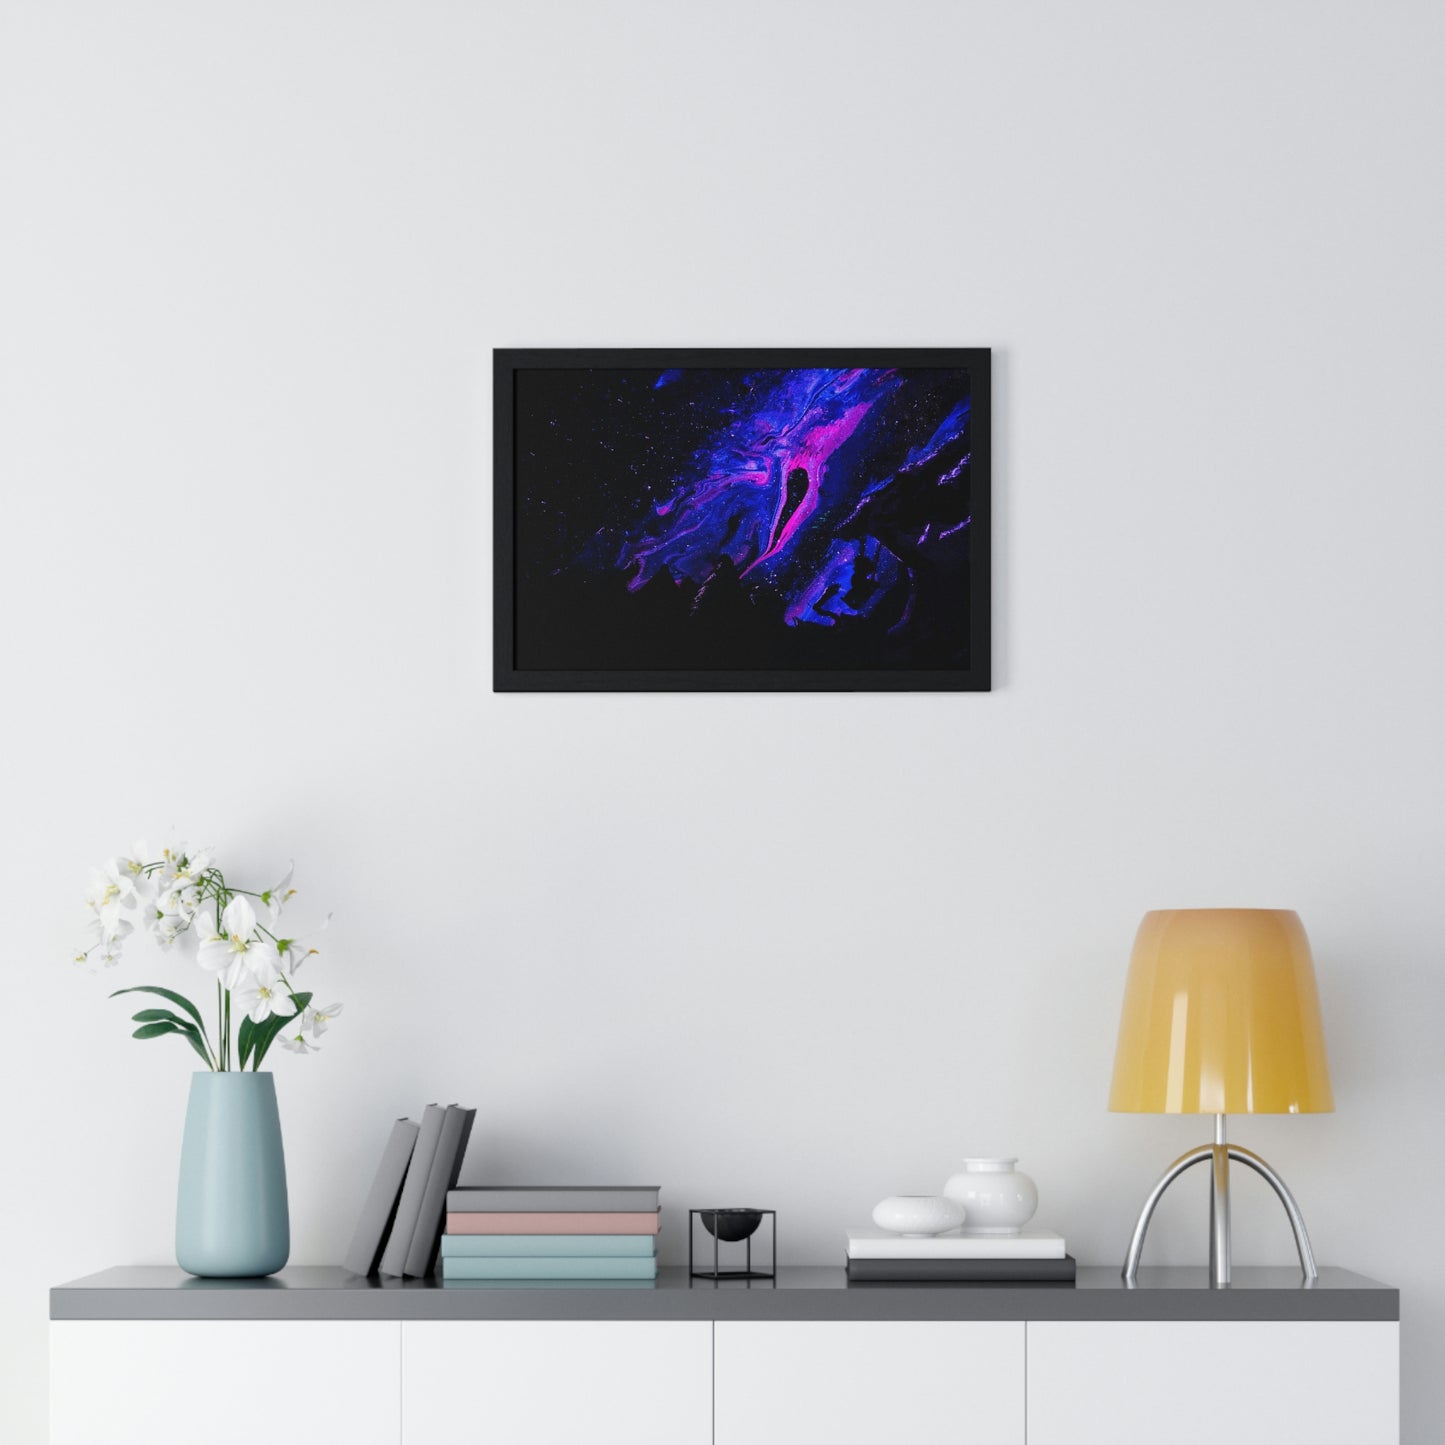 A Midnight Galaxy View Poster